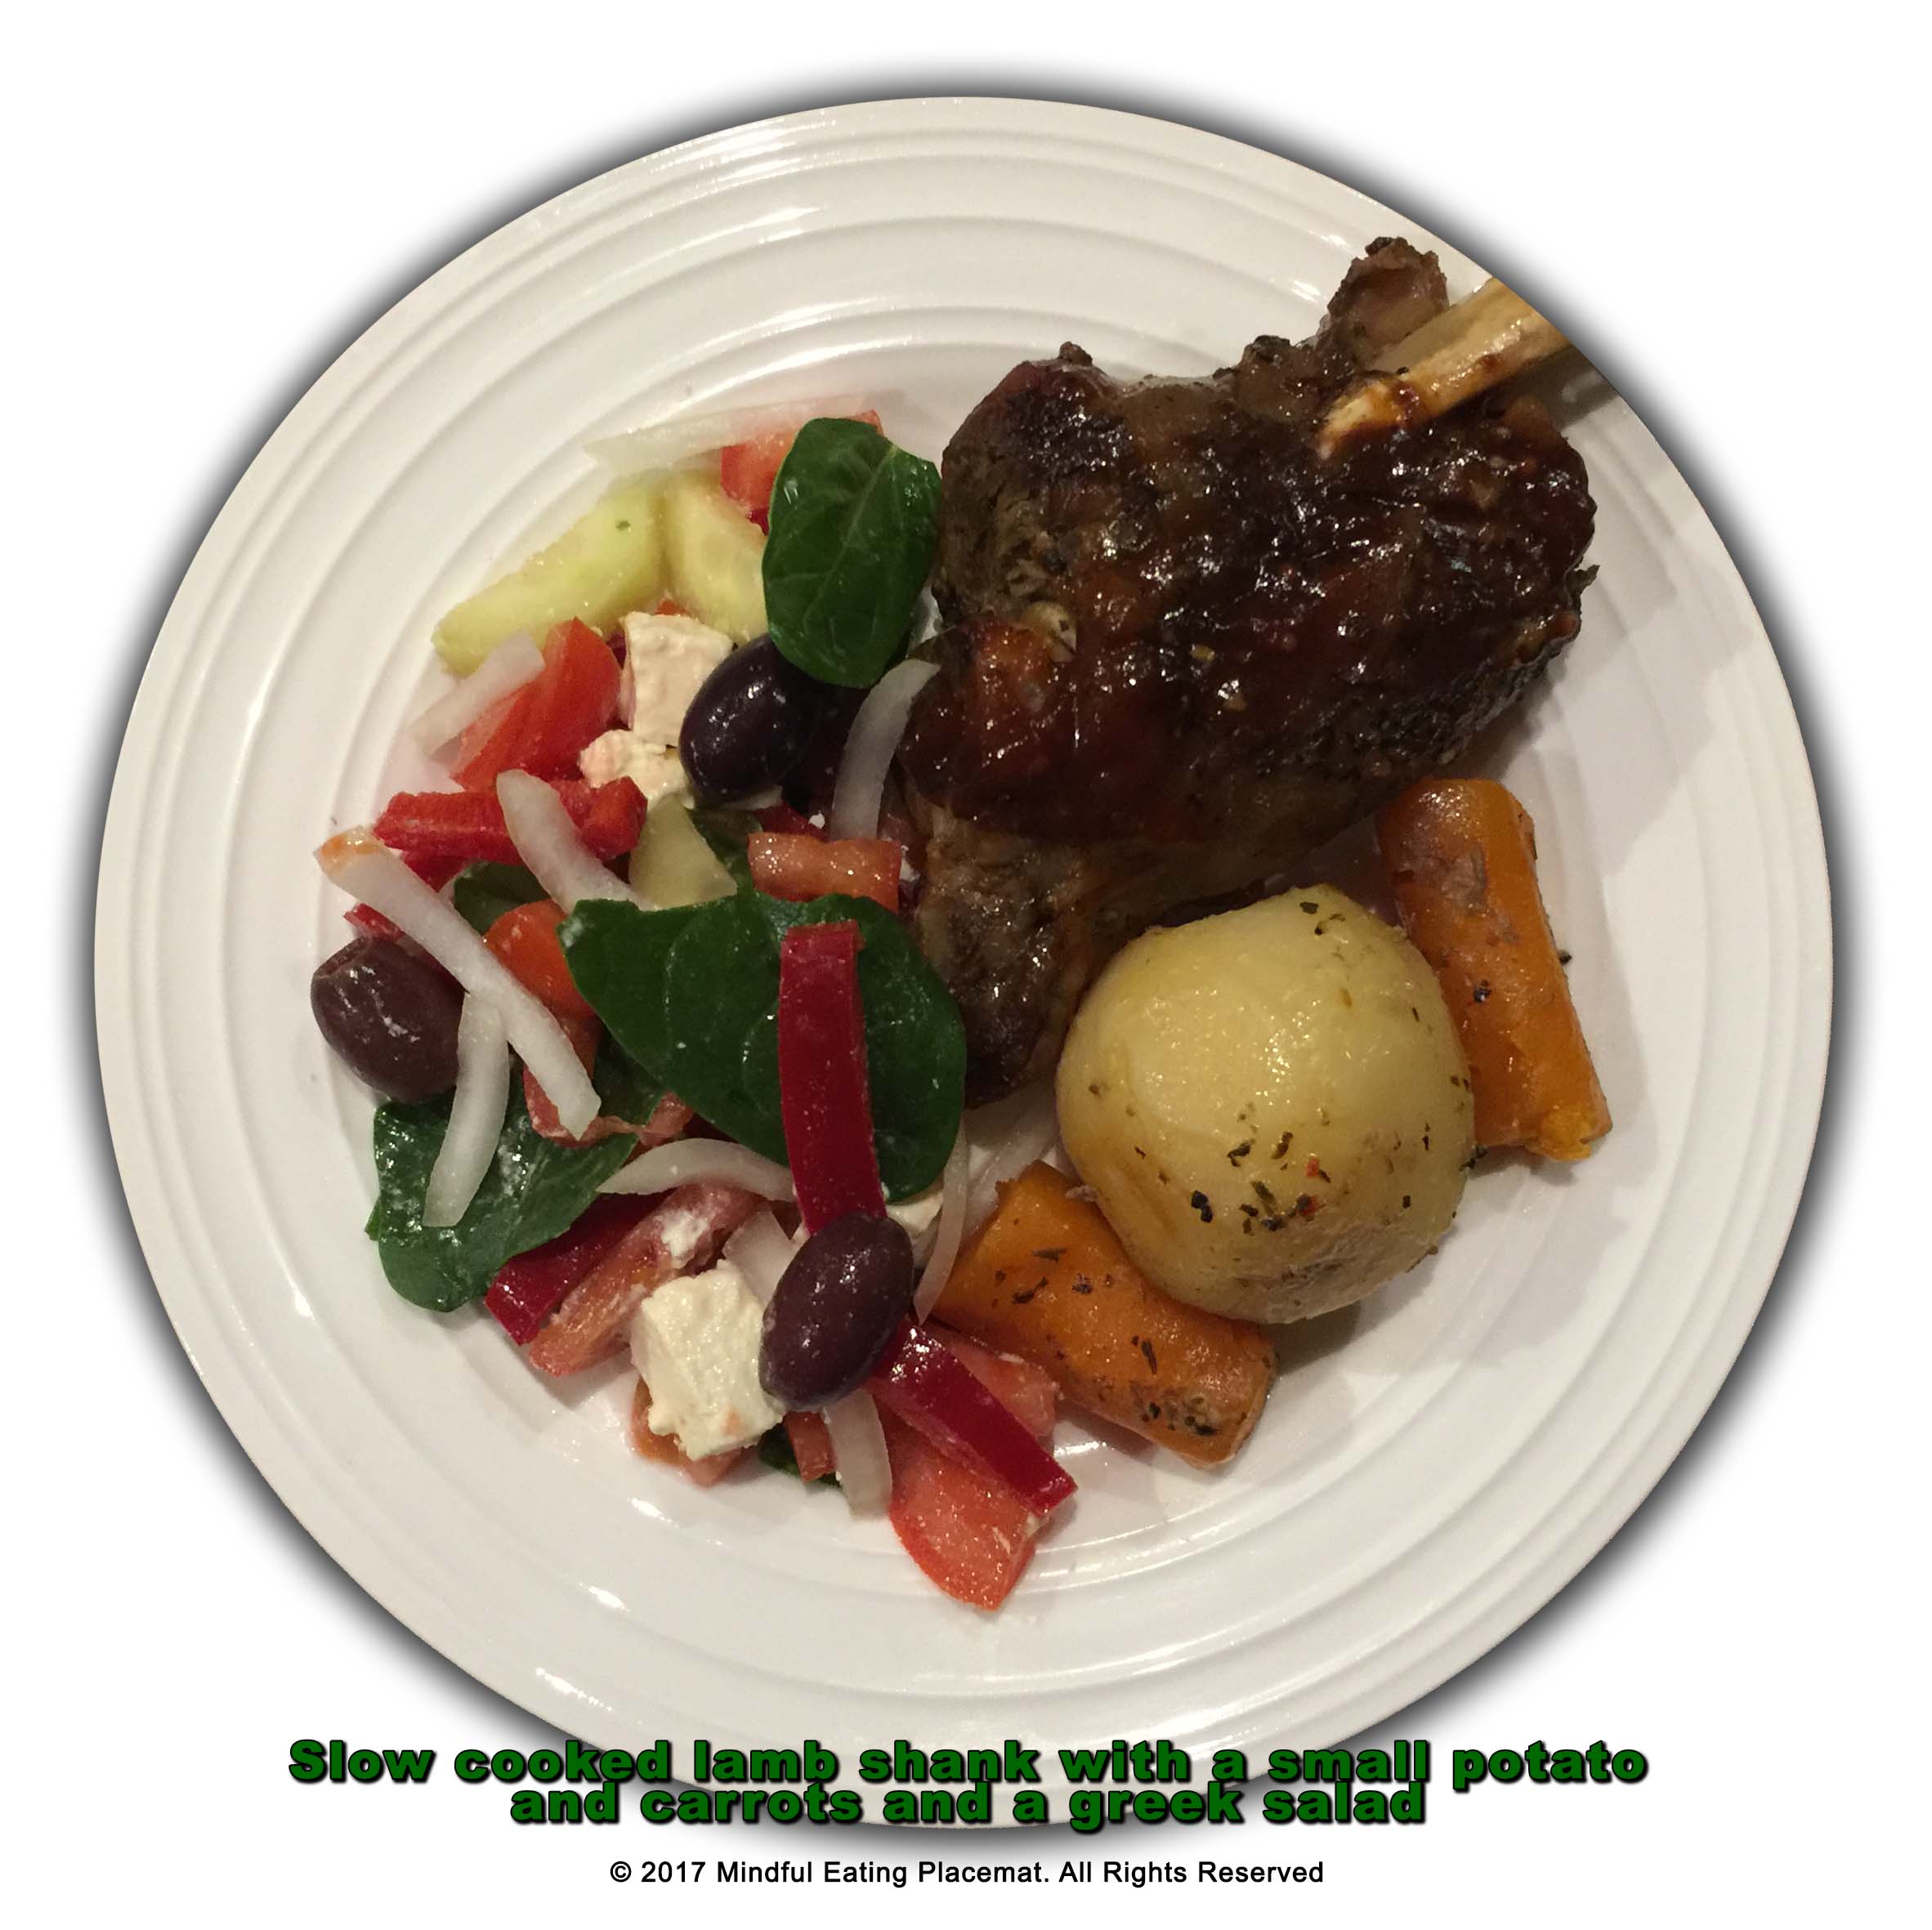 Lamb shank with roasted vegetables and greek salad